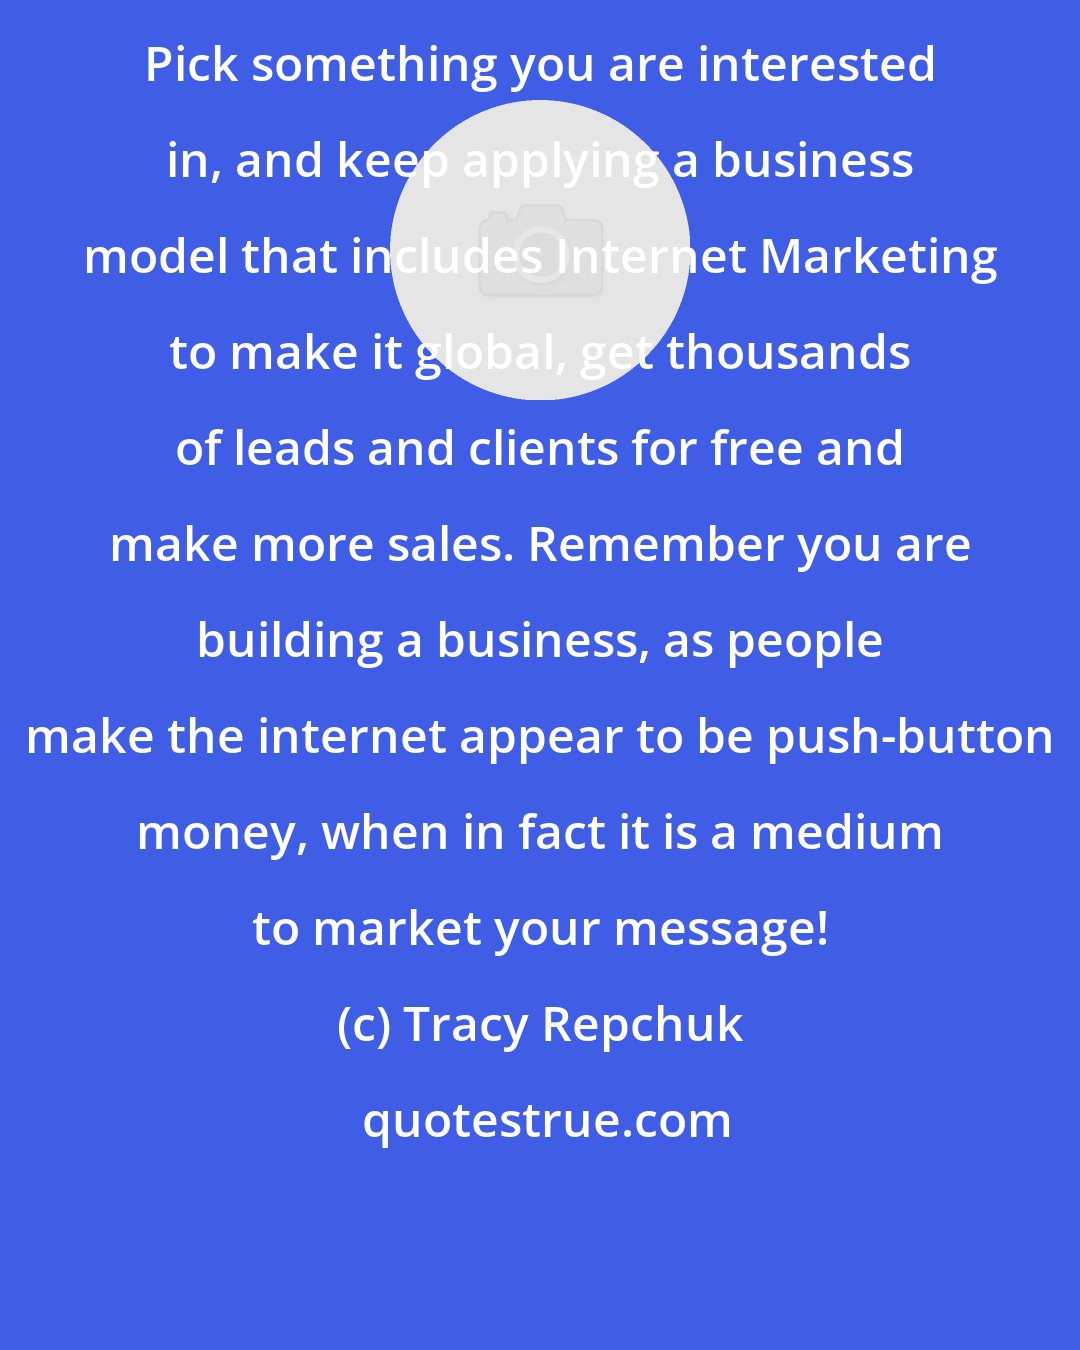 Tracy Repchuk: Pick something you are interested in, and keep applying a business model that includes Internet Marketing to make it global, get thousands of leads and clients for free and make more sales. Remember you are building a business, as people make the internet appear to be push-button money, when in fact it is a medium to market your message!